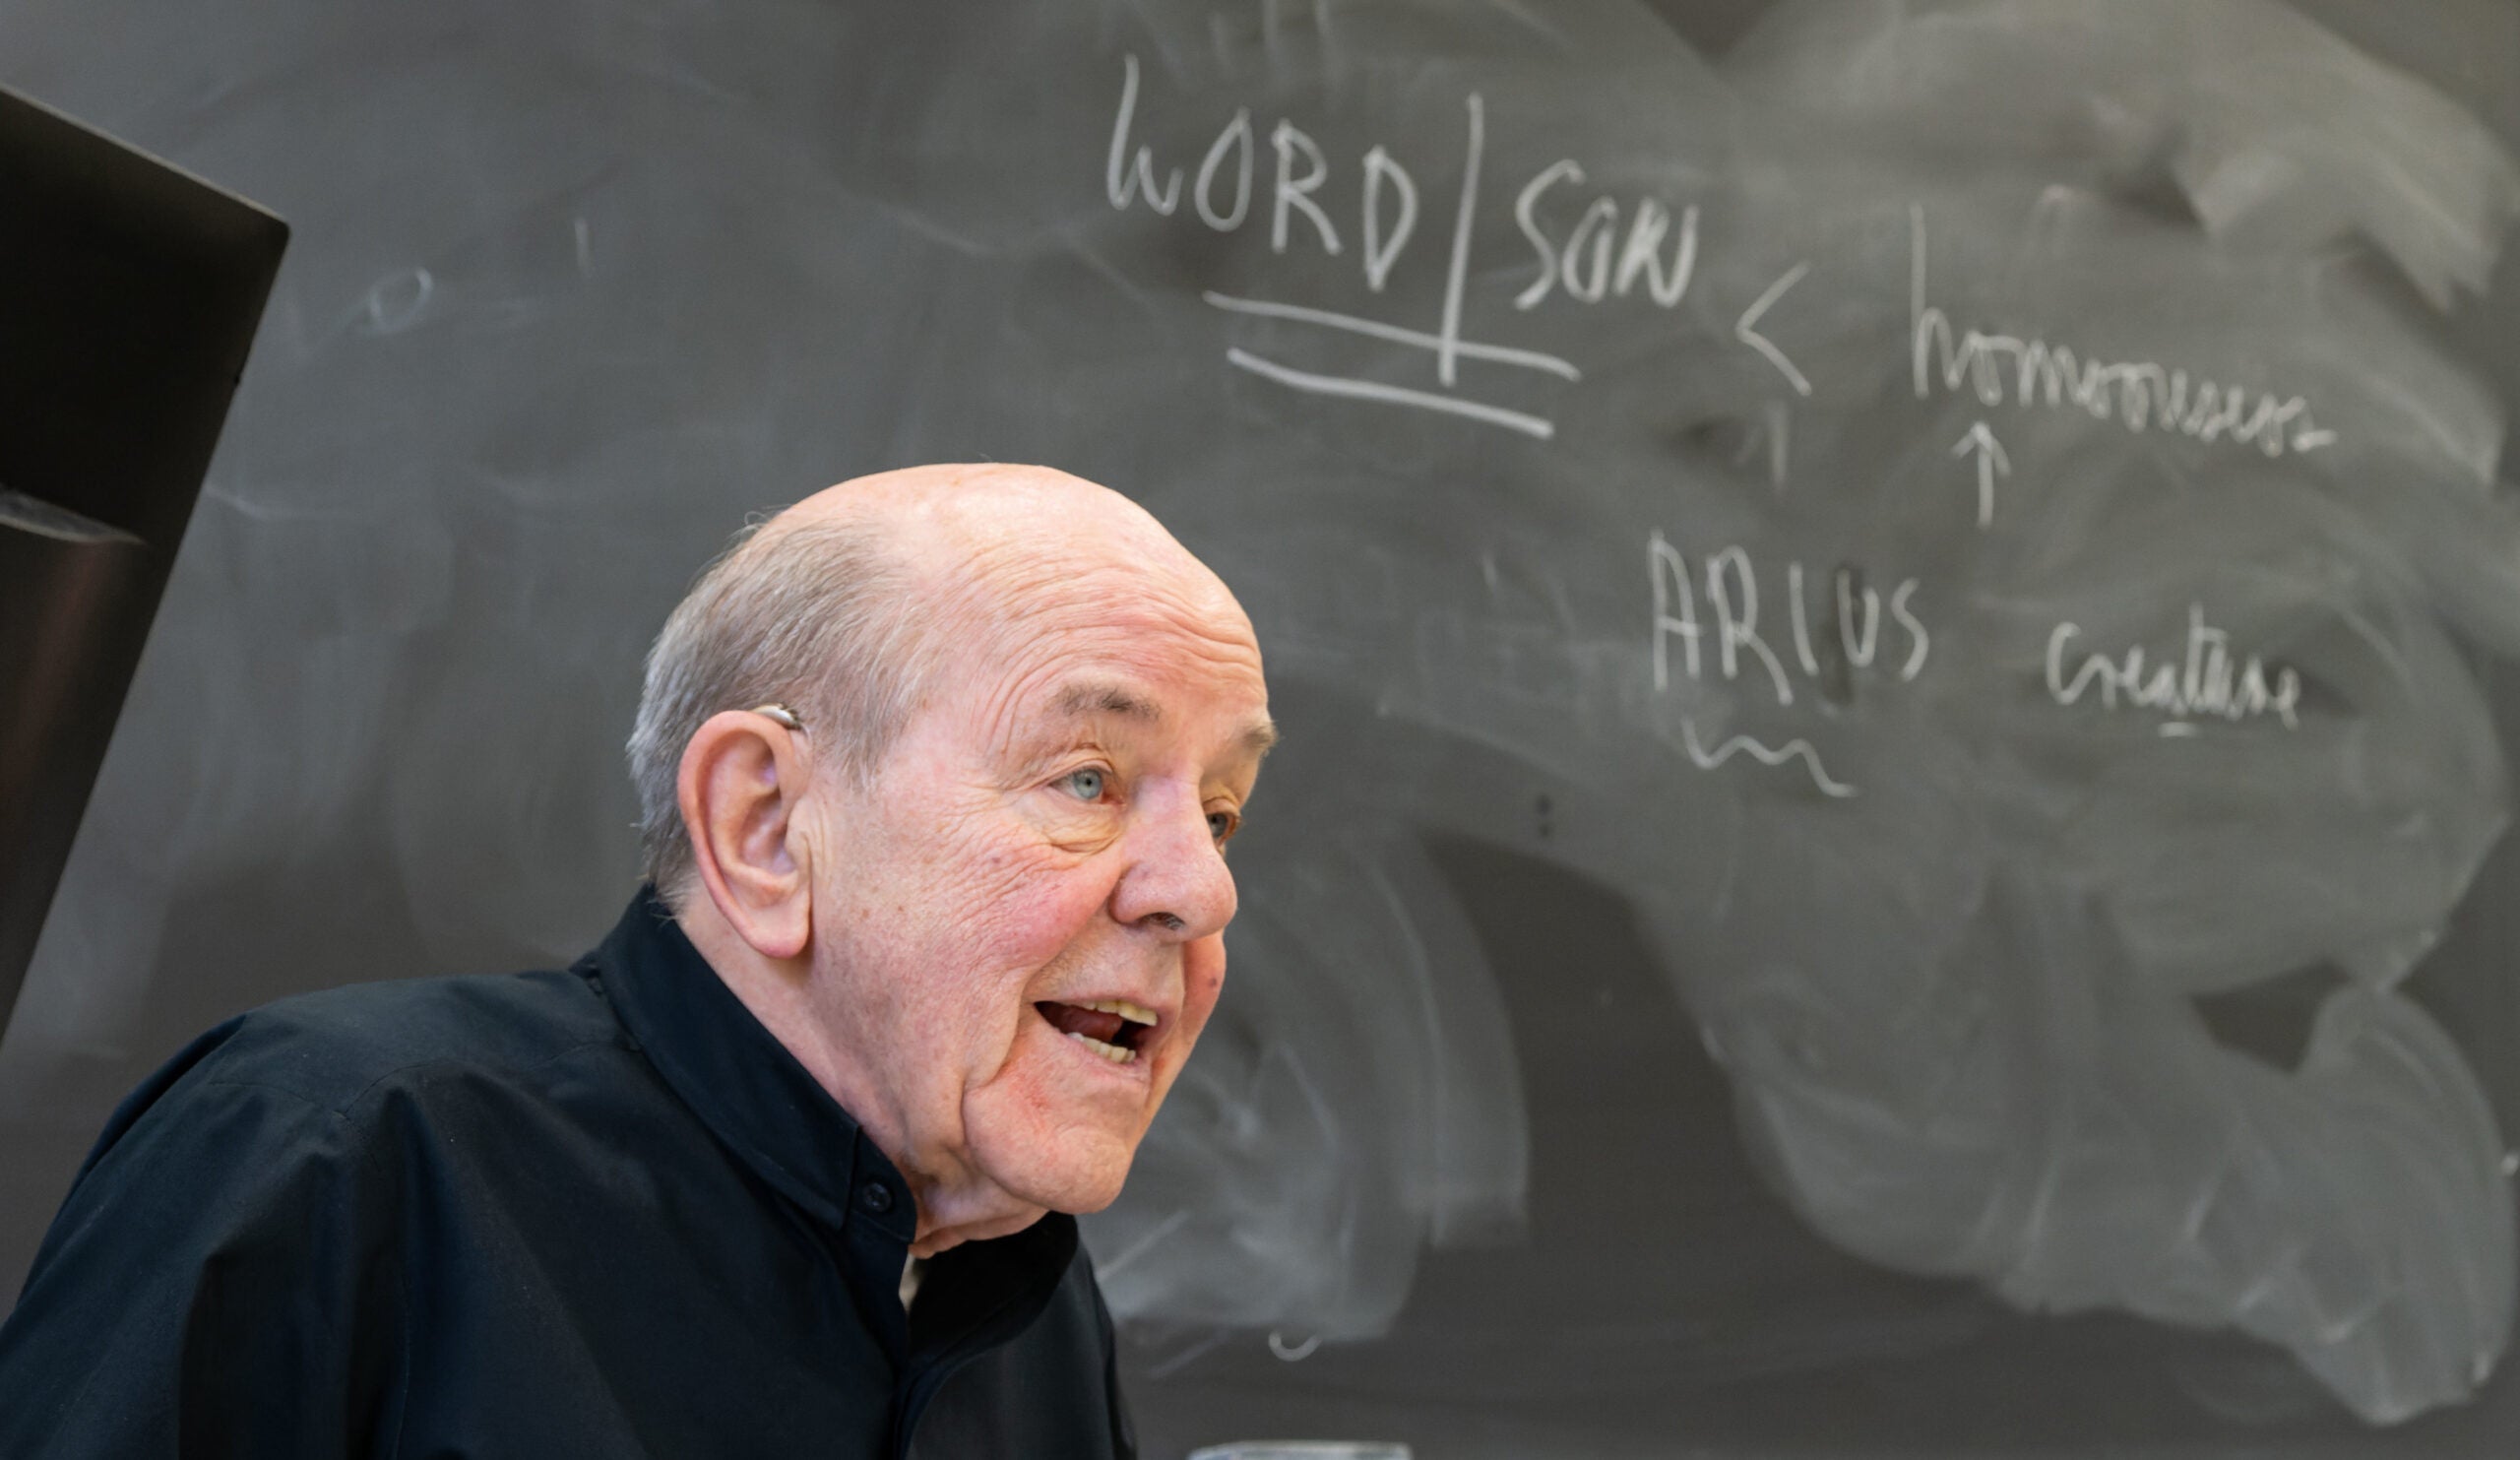 a priest stands in front of a chalkboard